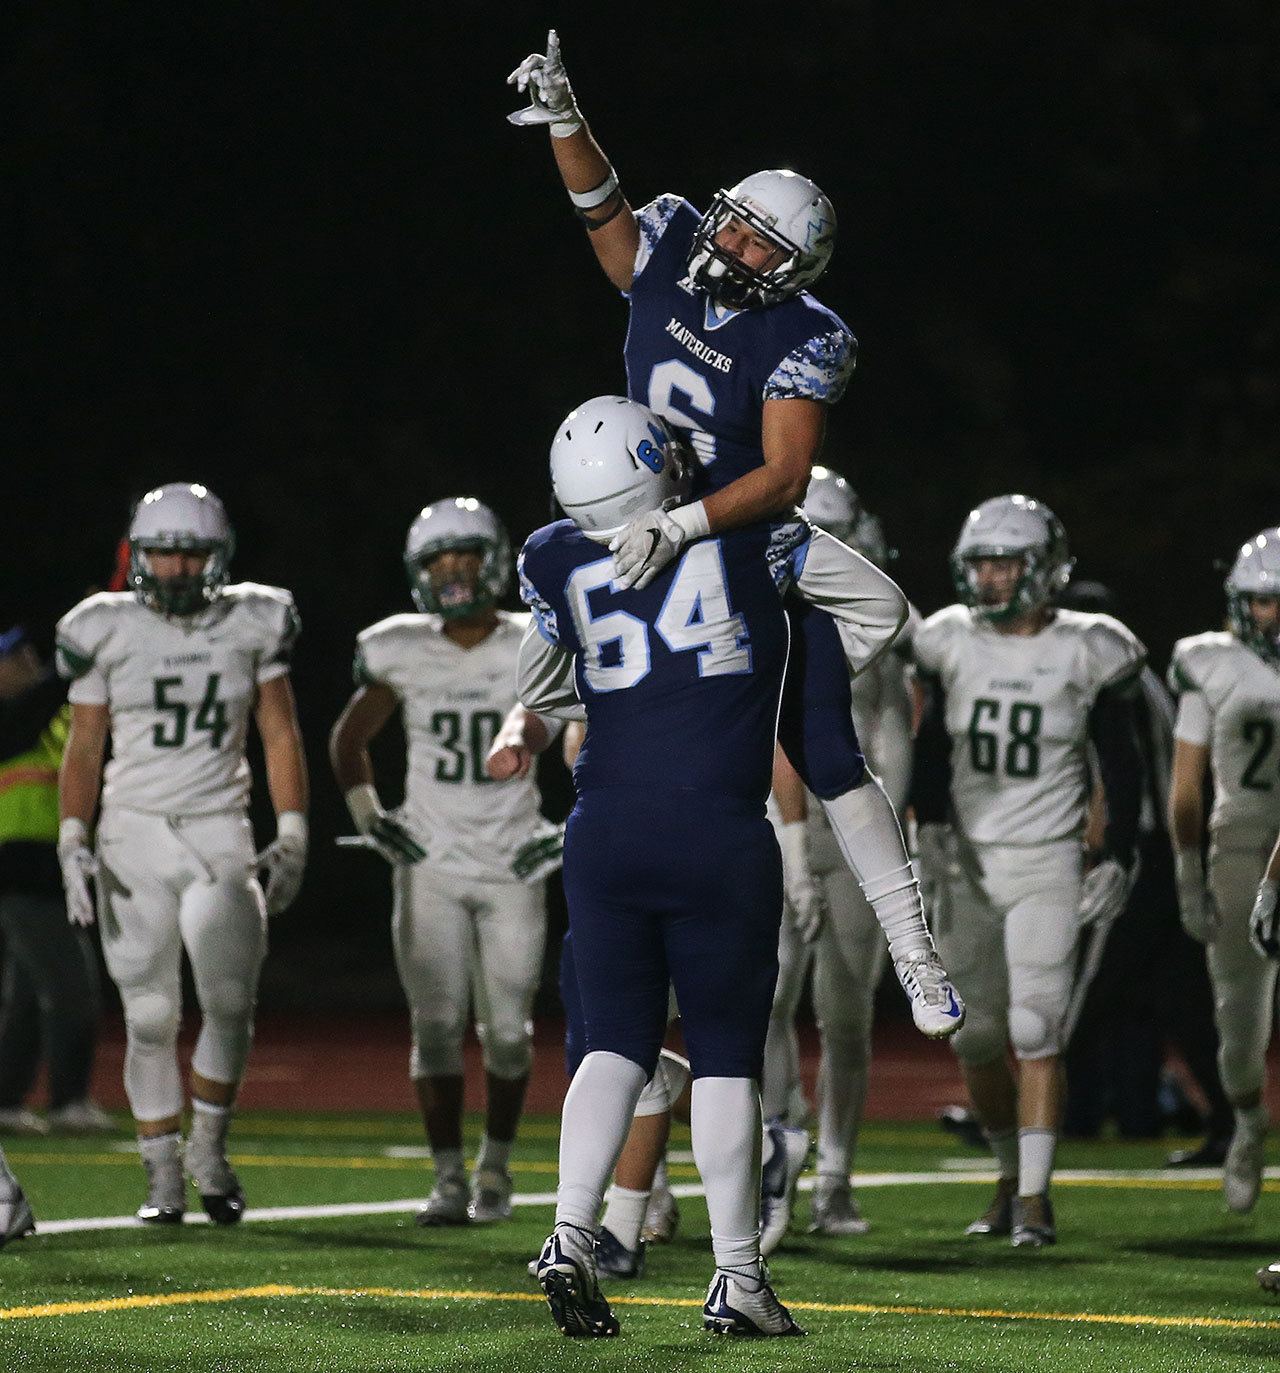 Meadowdale’s Kela Marshall (6) celebrates a touchdown with teammate Bryce Chapman during a 3A state quarterfinal game against Peninsula on Friday at Edmonds Stadium. (Kevin Clark / The Herald)